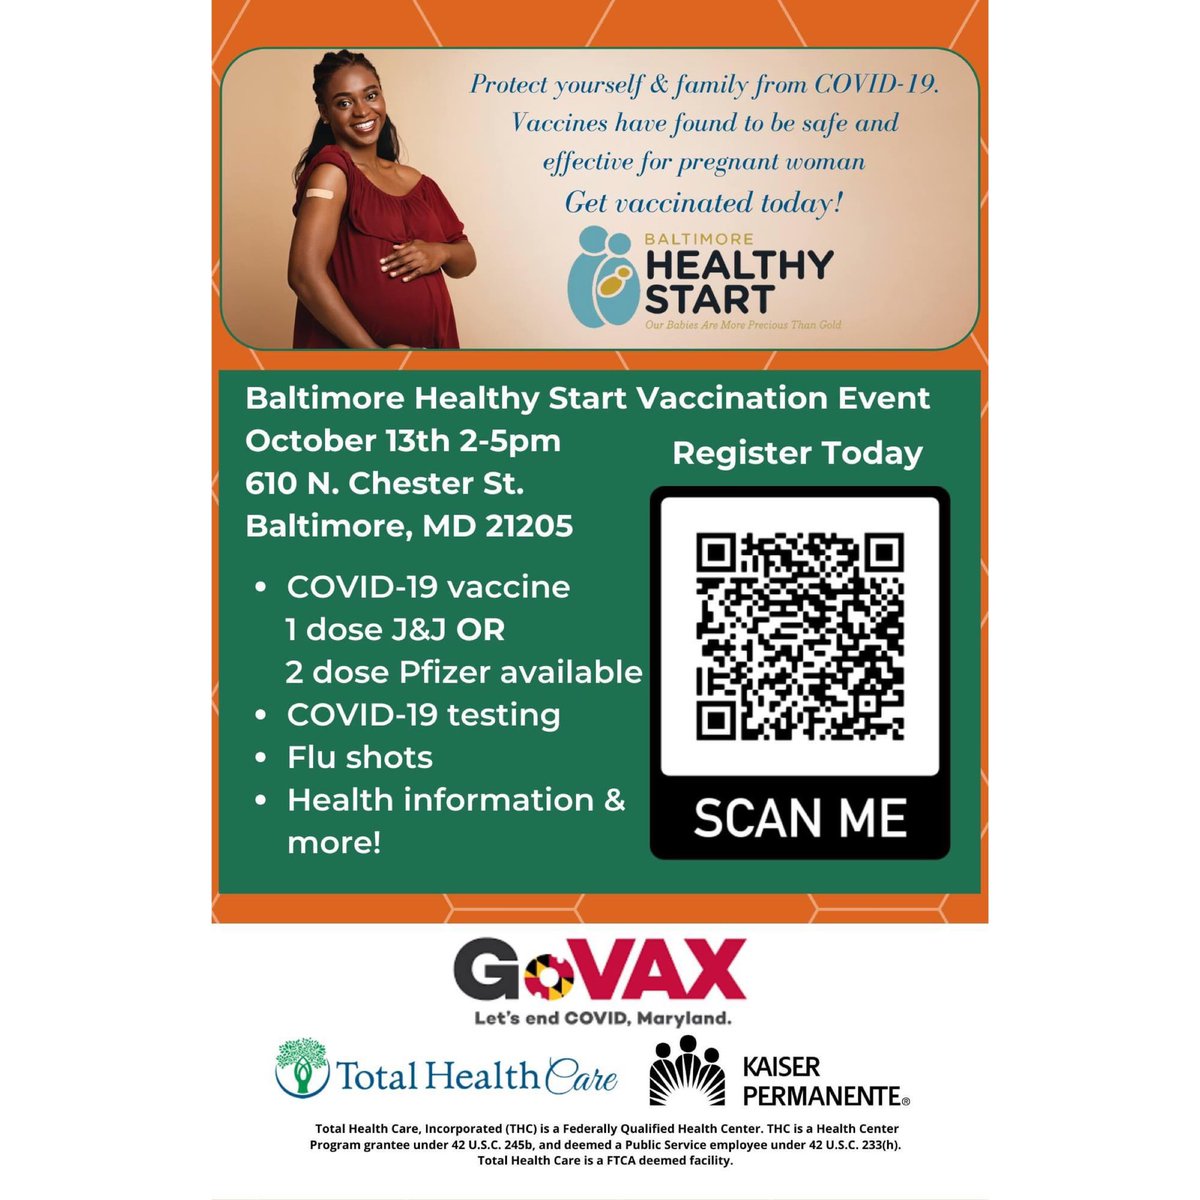 **THIS WEDNESDAY, 10/13!** BHS vaccine clinic Wed, Oct. 13th,2:00 pm-5:00 pm at: 610 N. Chester Street, Baltimore, MD 21205. Appointments and walk-ins are welcomed! In addition to COVID-19 vaccines (J&J and Pfizer) and flu shots, Pfizer boosters will be available.